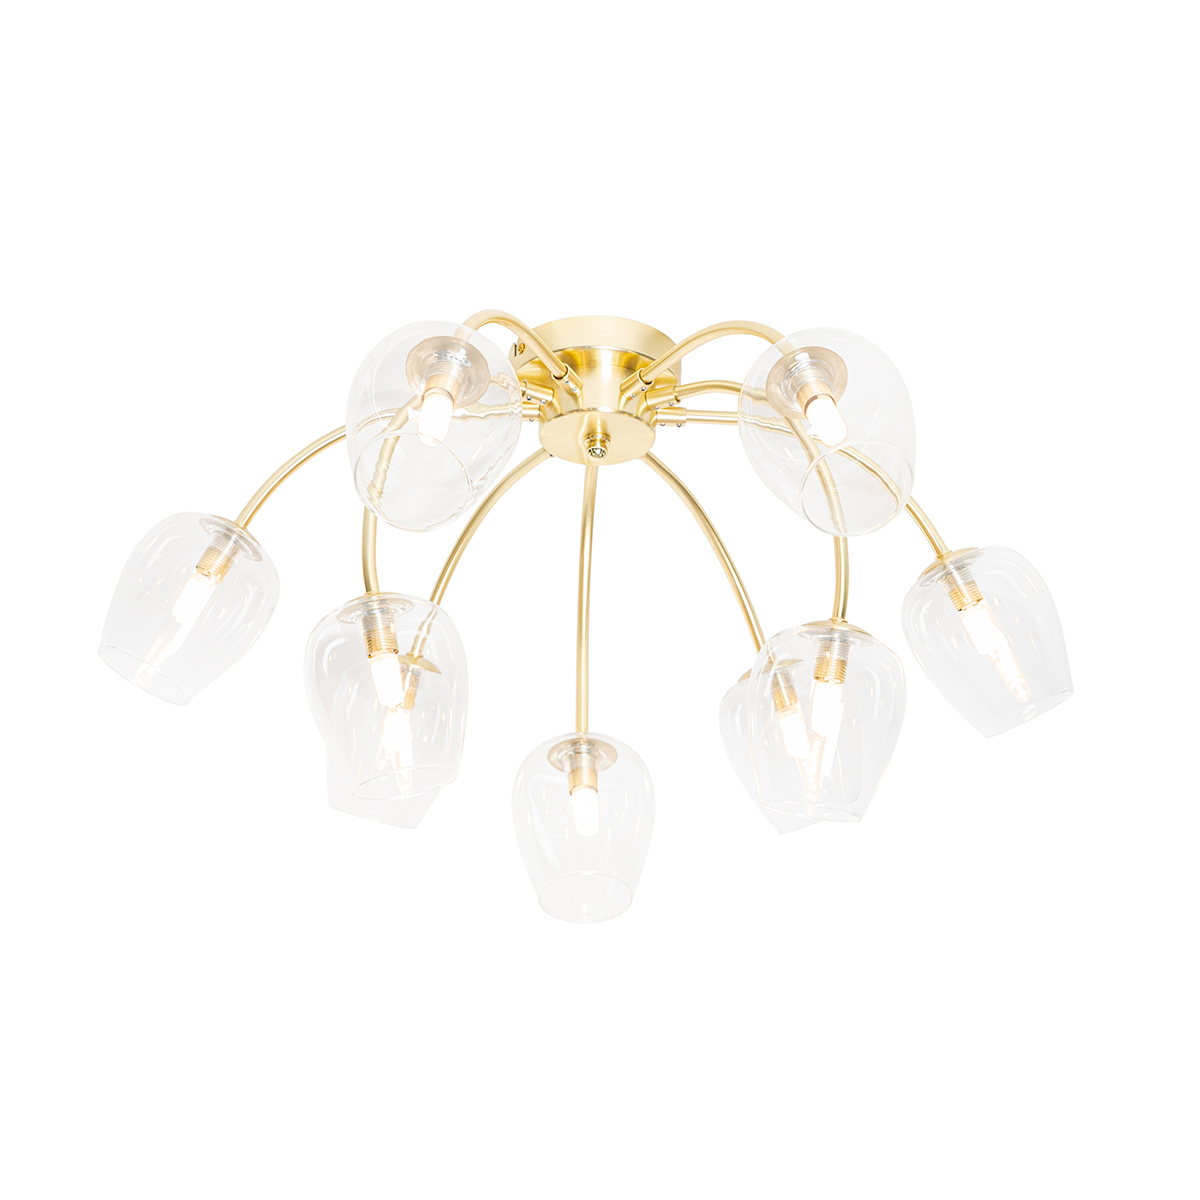 Classic ceiling lamp gold with glass 9 lights - Elien